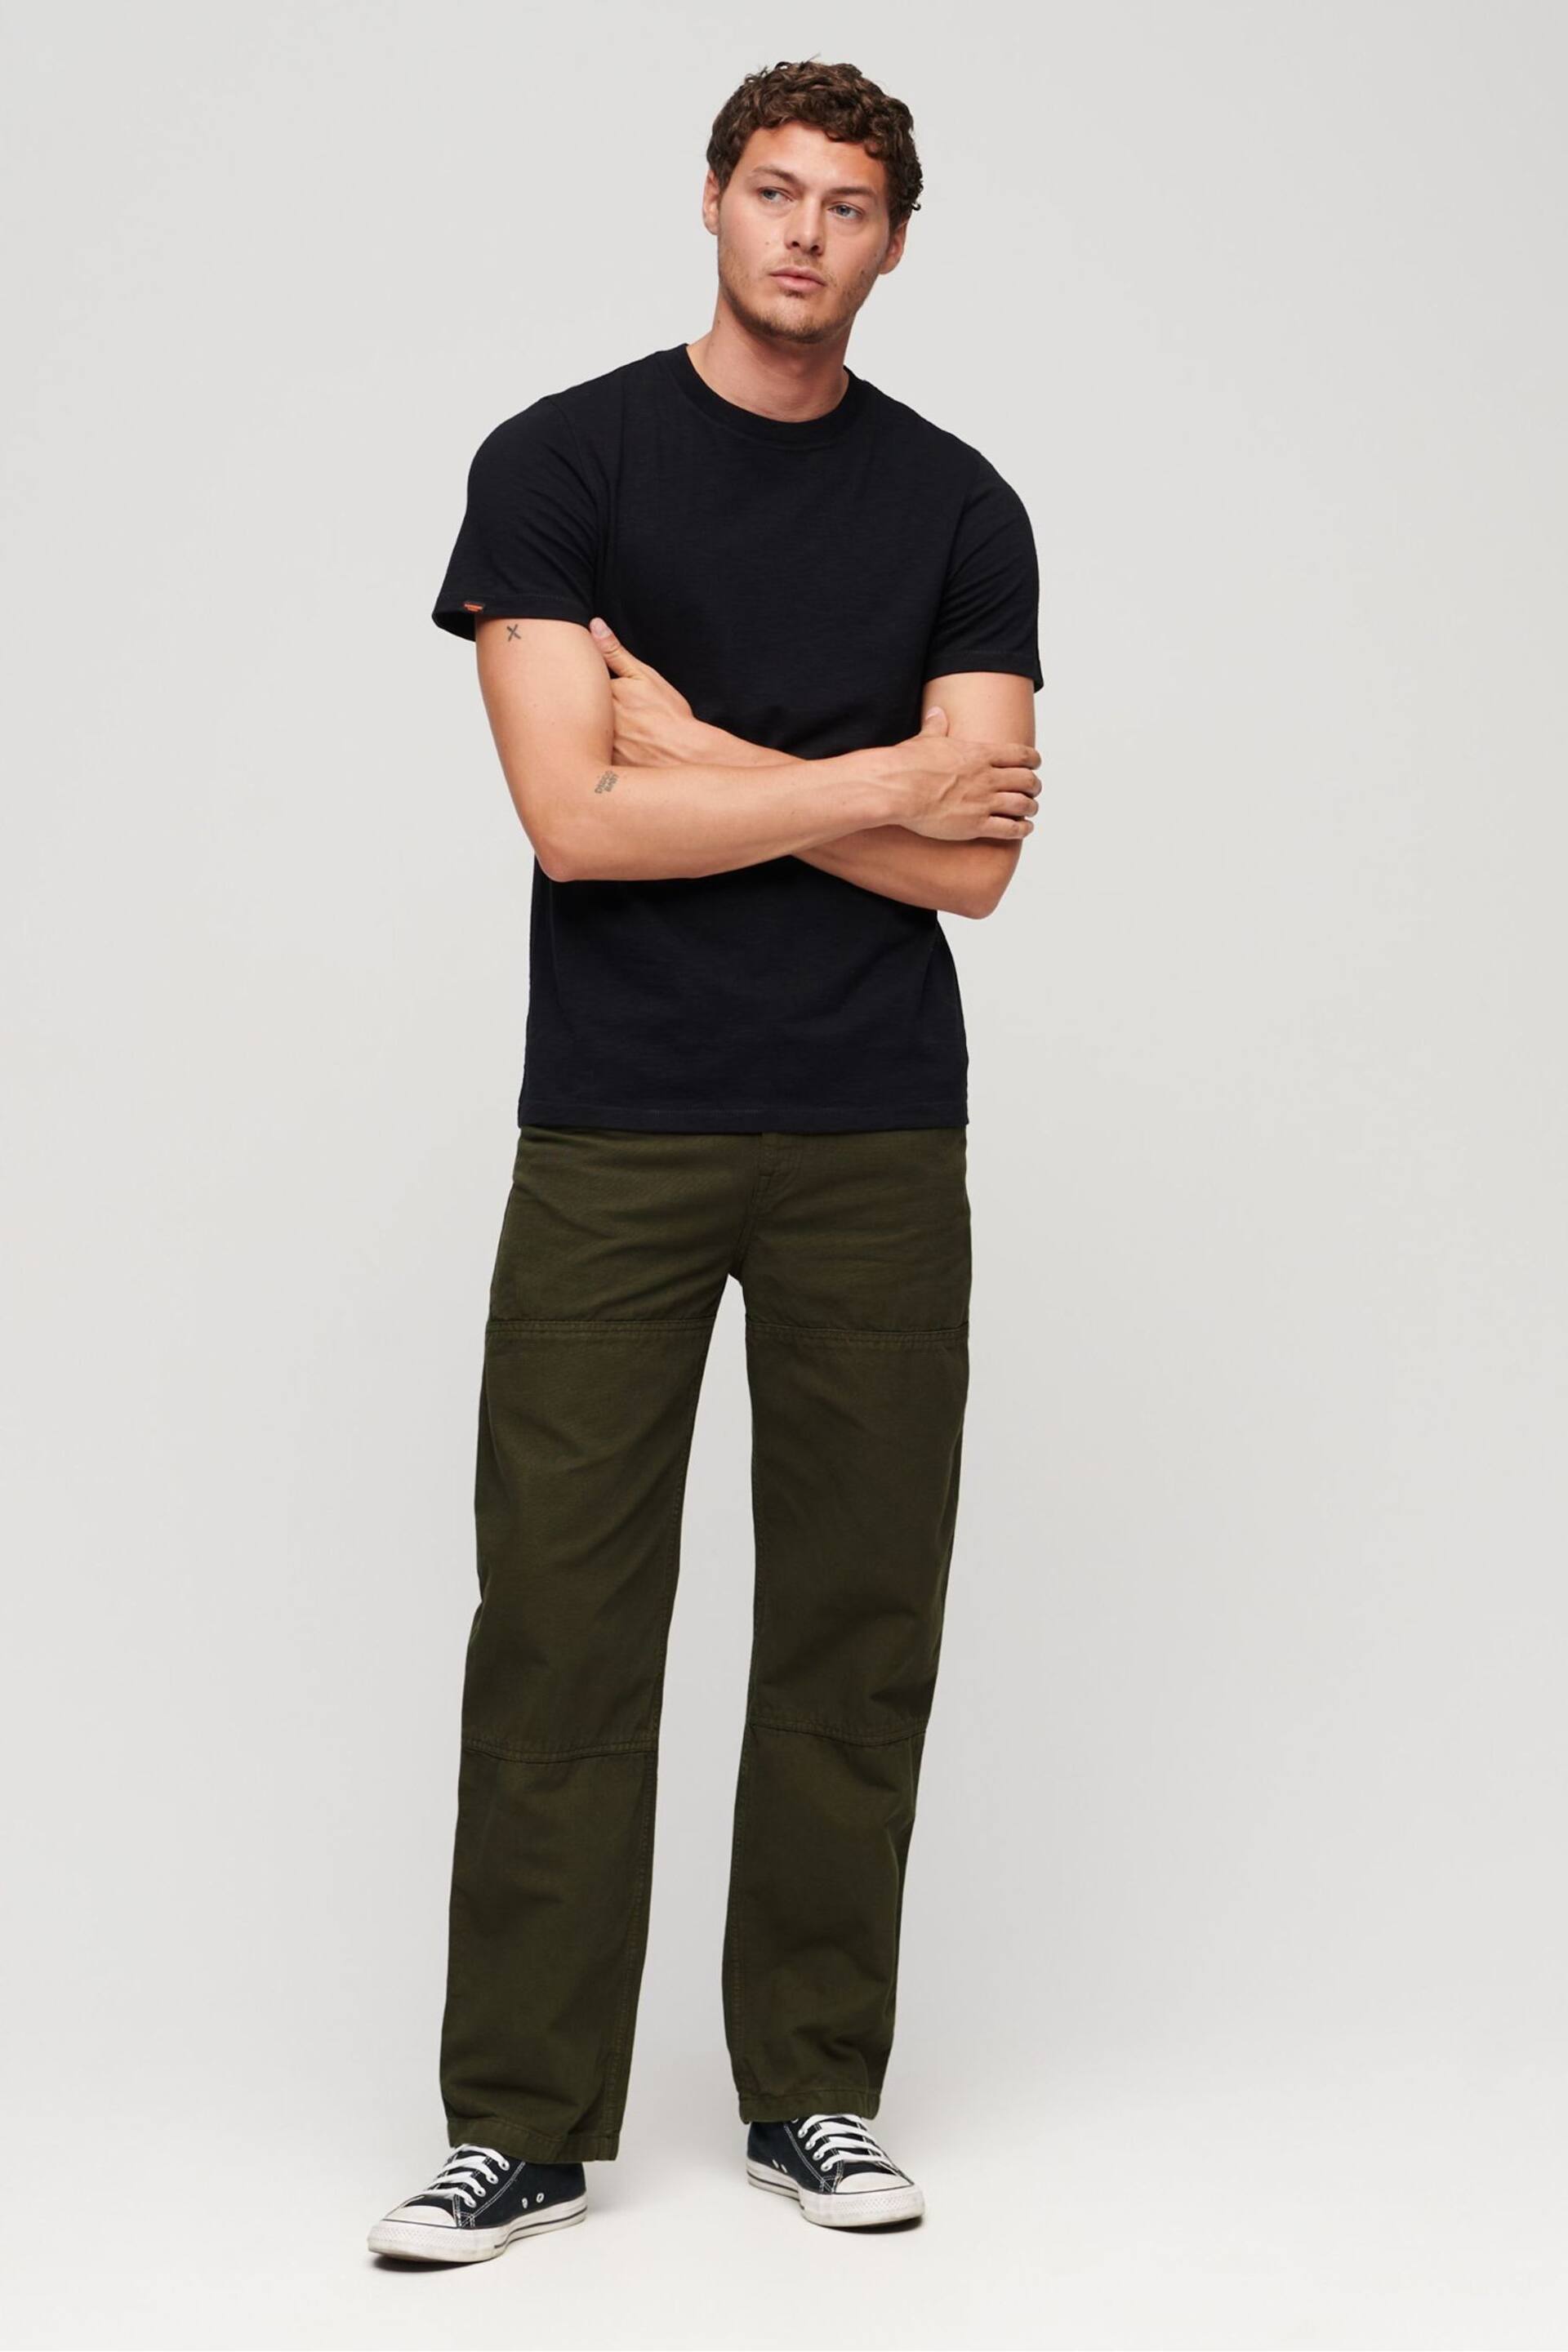 Superdry Green Carpenter Trousers - Image 3 of 7